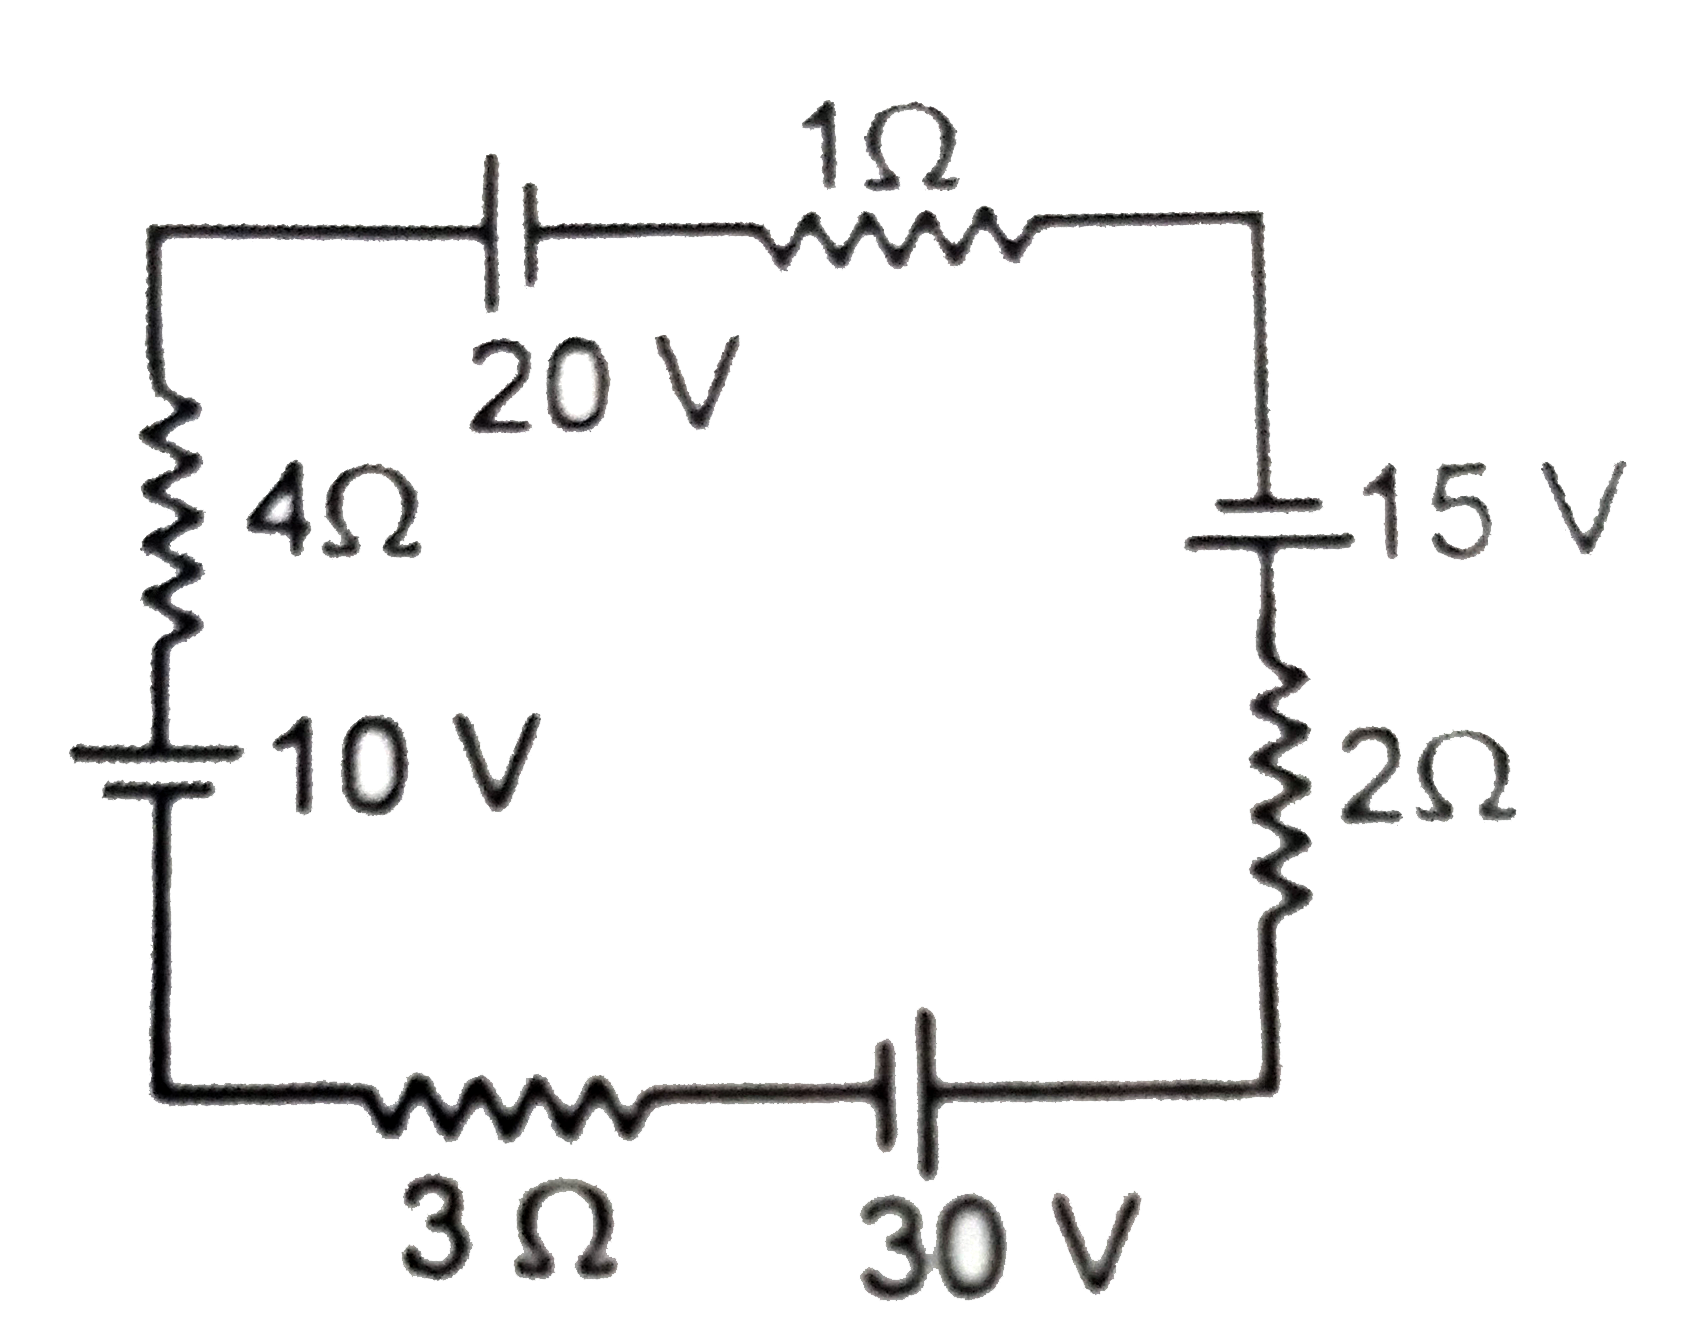 Find current in the circuit